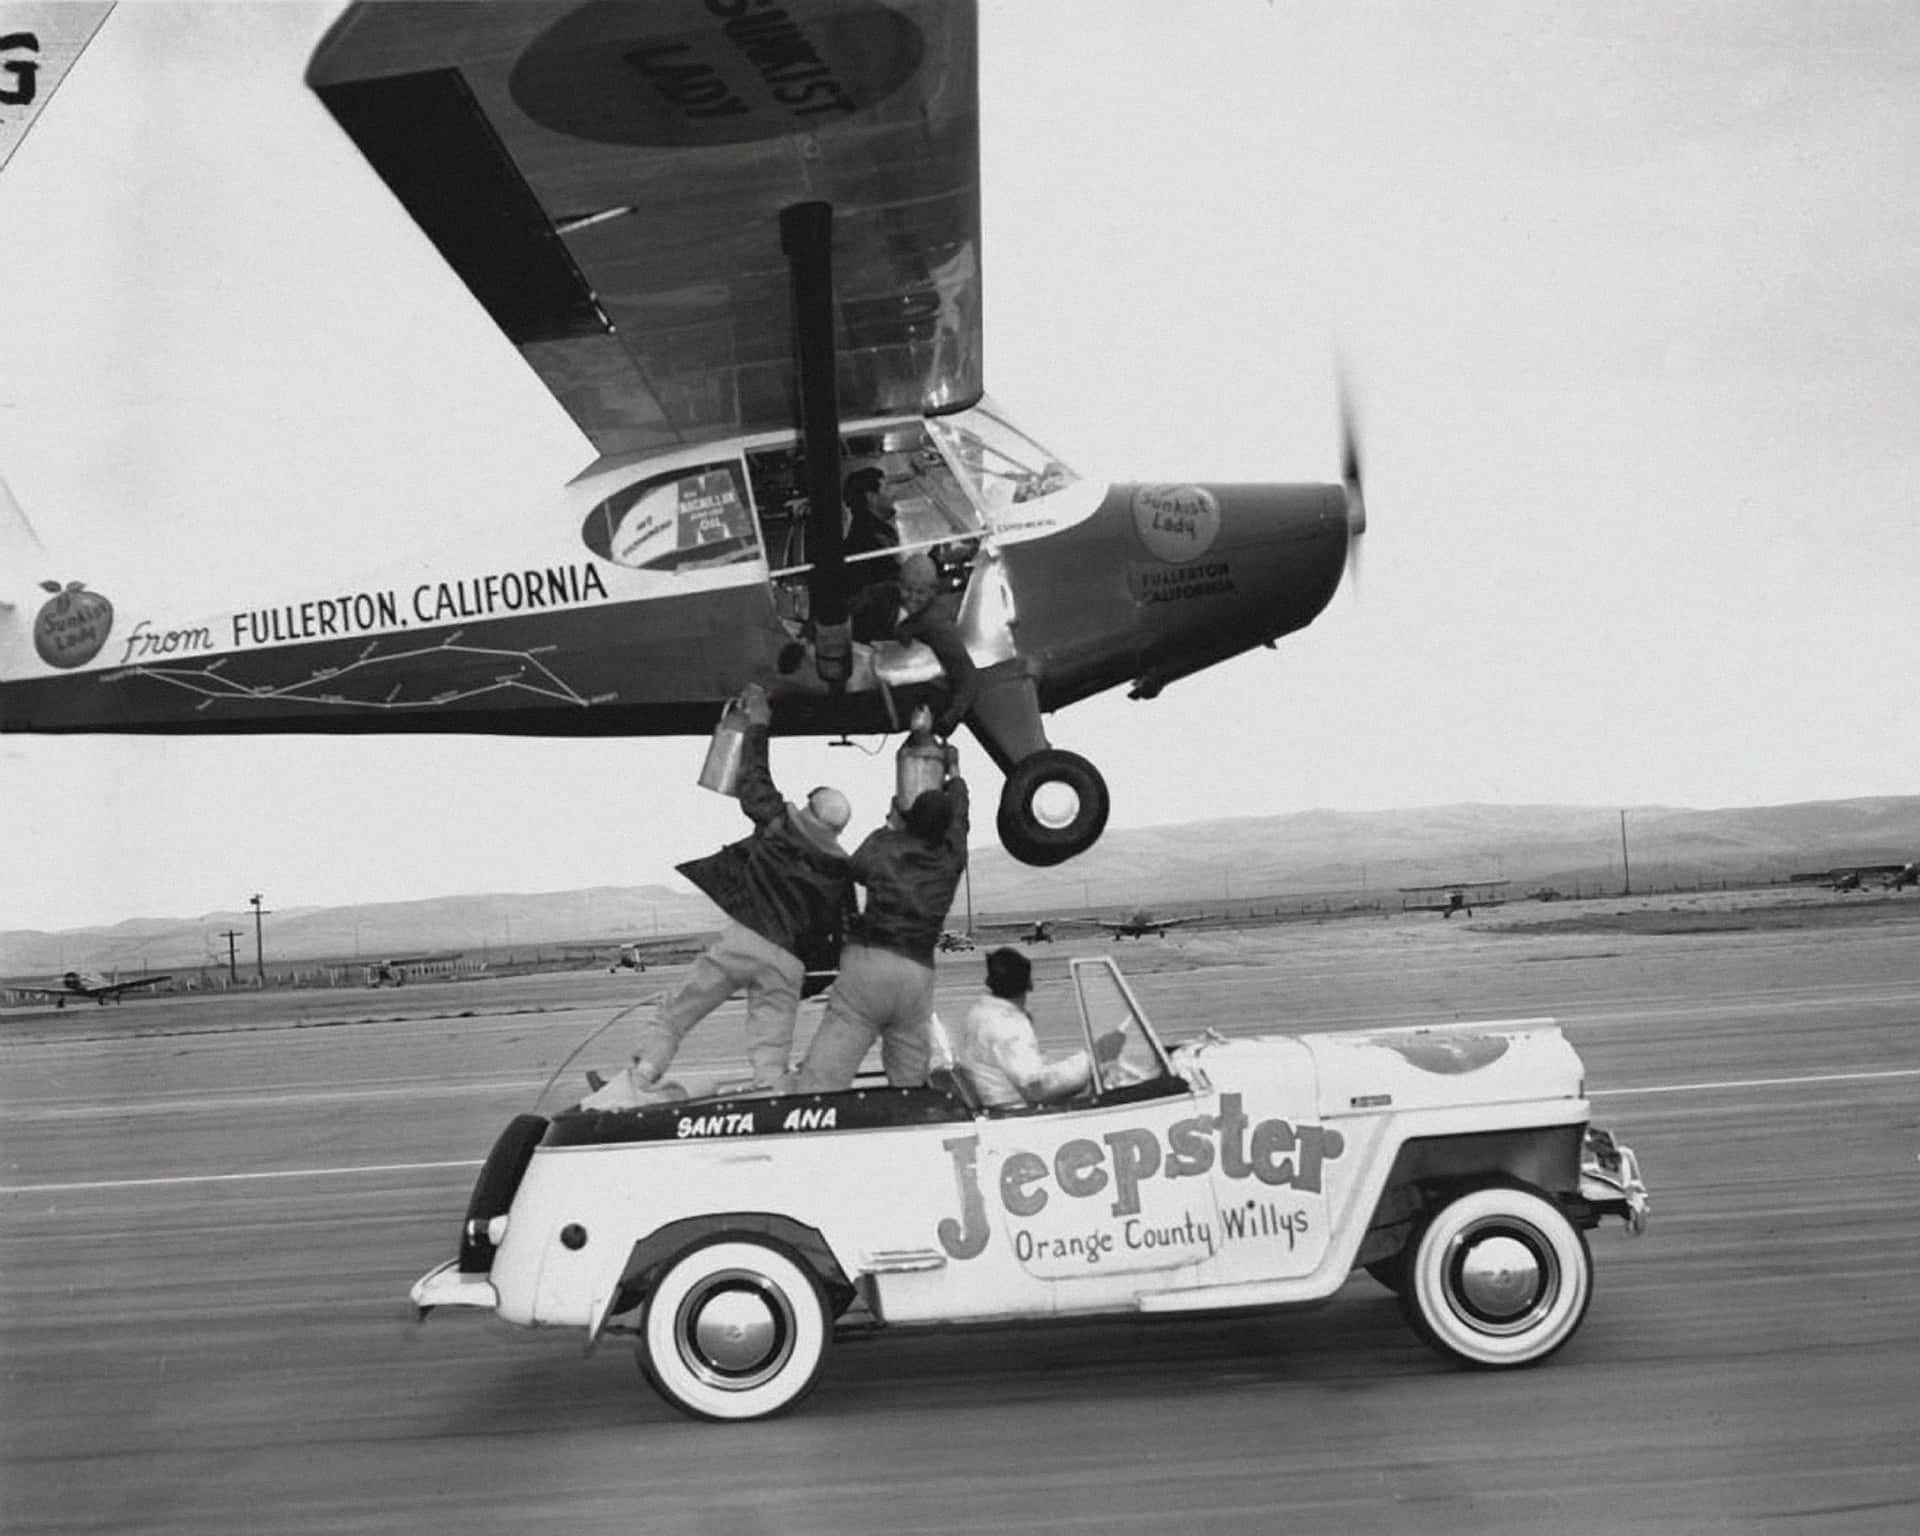 Dick Riedel and Bill Barris form up with a Jeepster to take on supplies during their 1949 record flight. Ground resupply became the norm for endurance record attempts in 1939 and after.